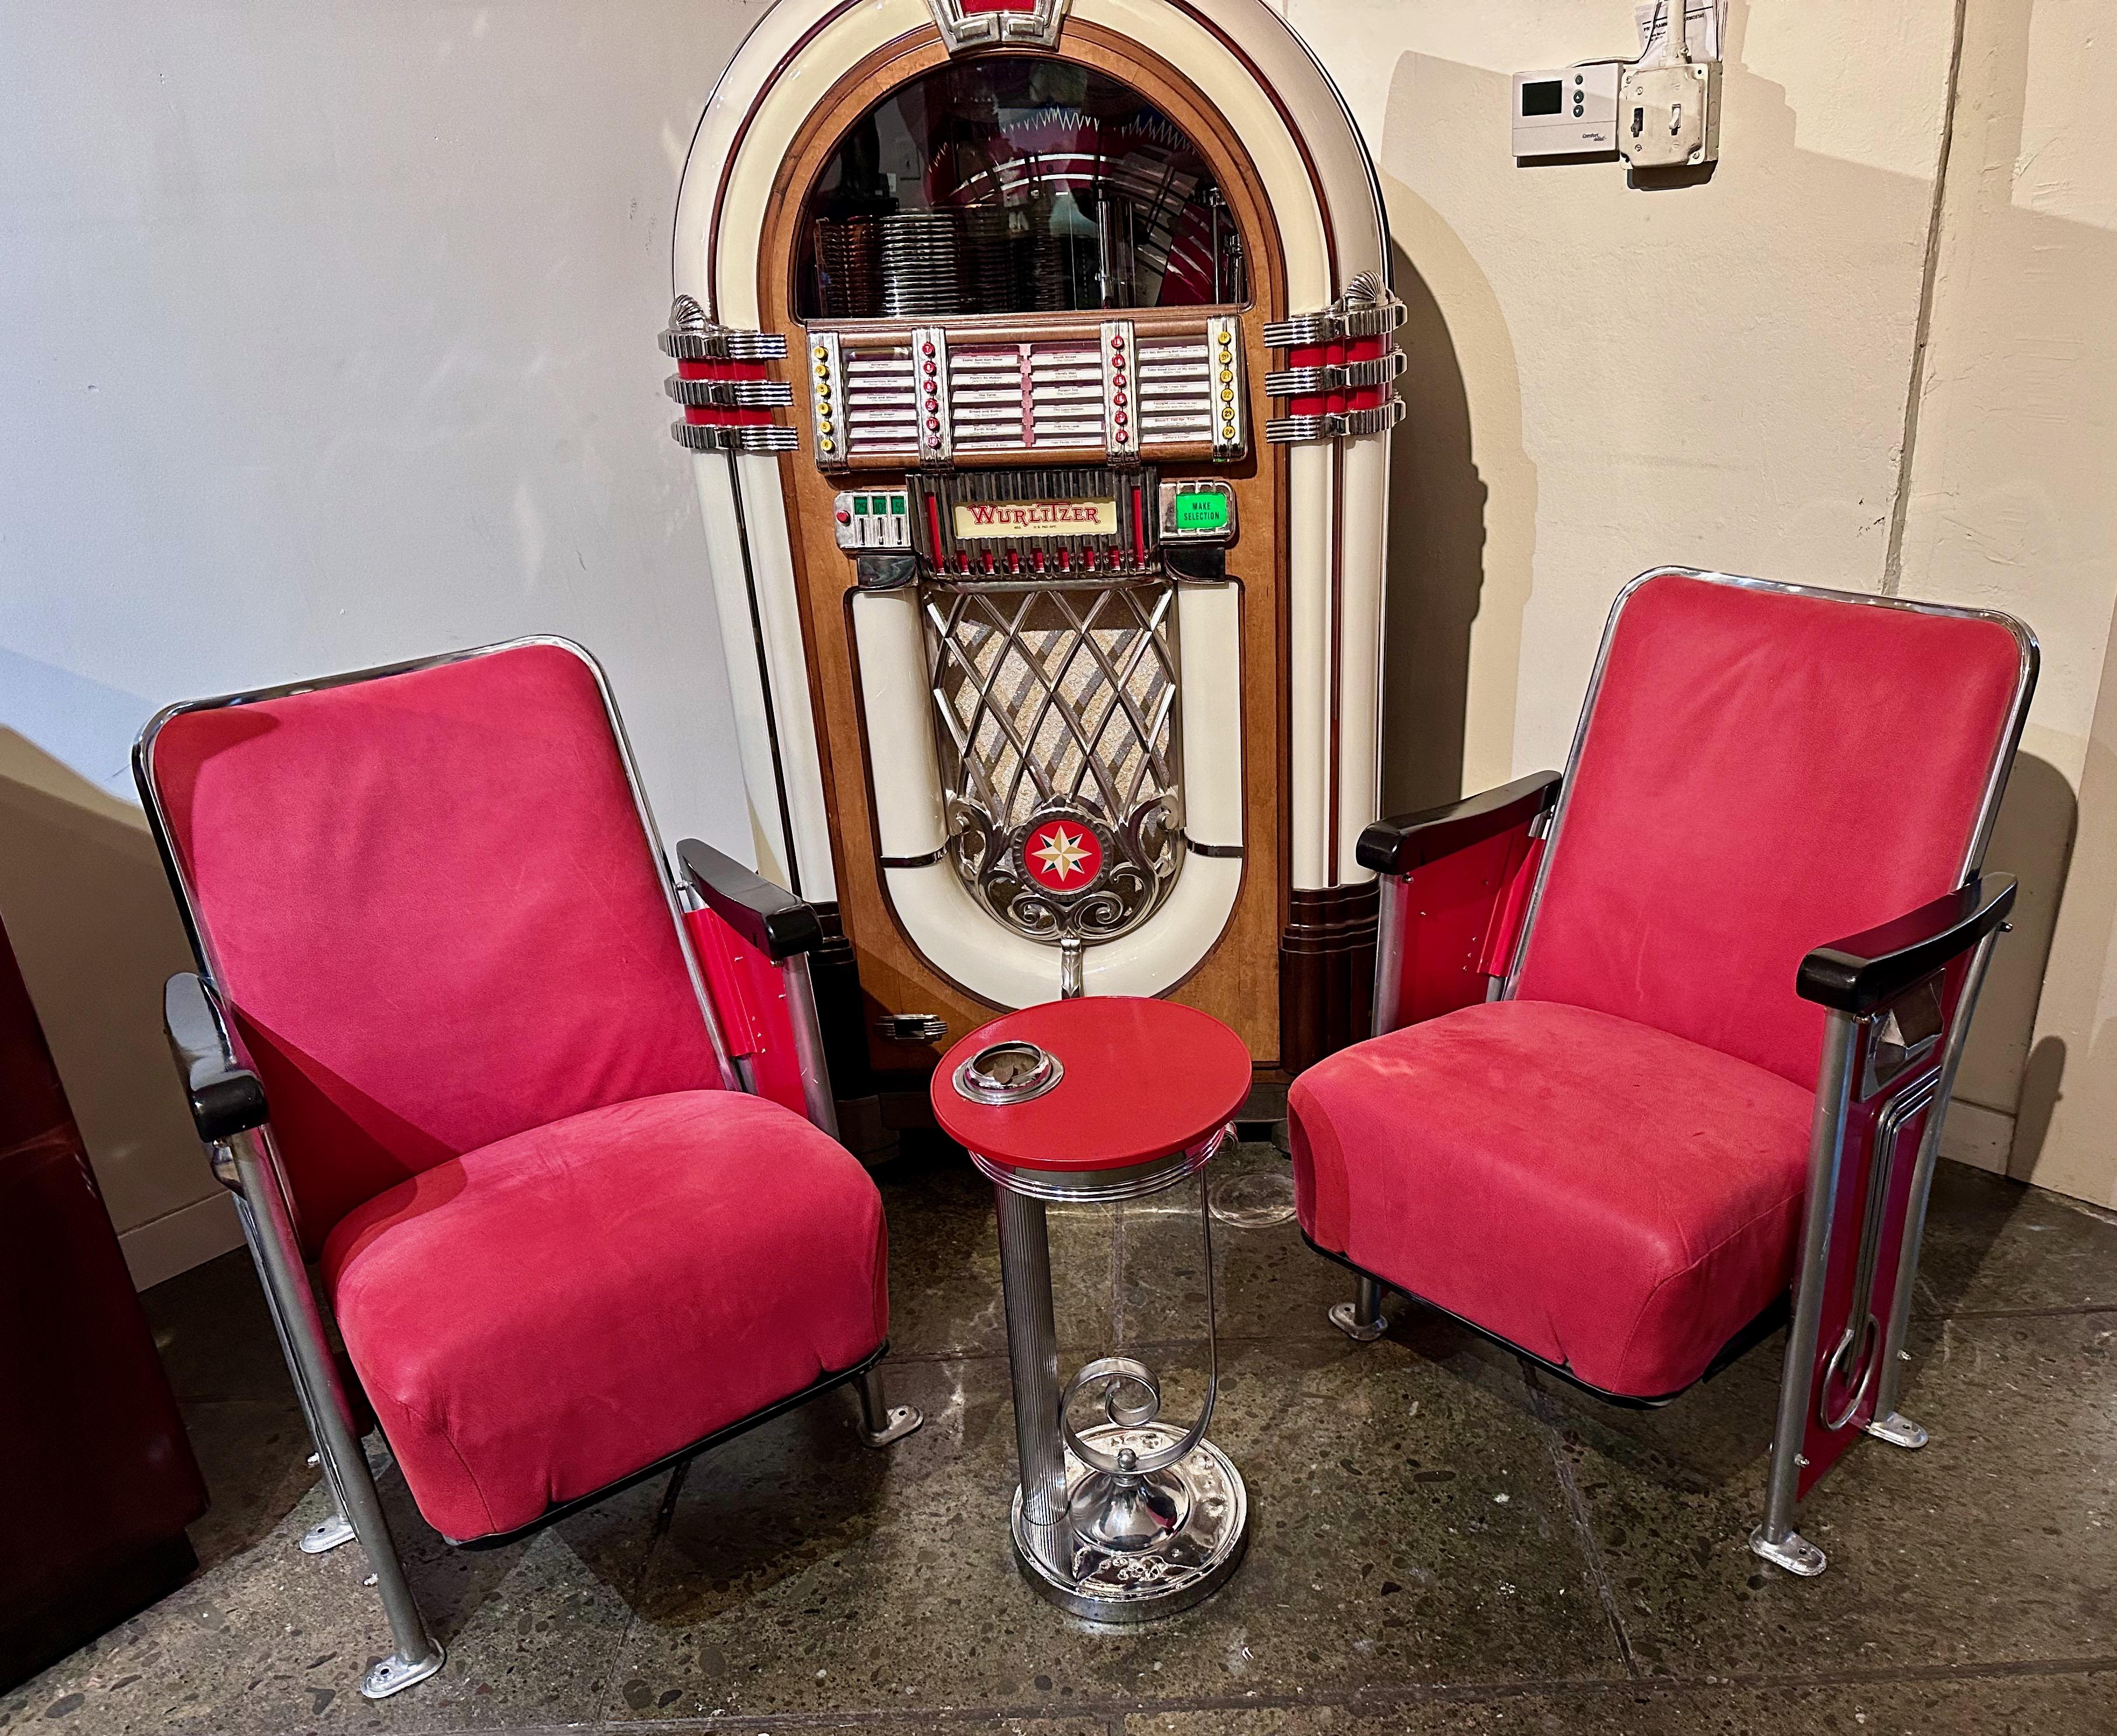 Restored Art Deco Movie Theater seats. These could showcase your home theater or just work as a pair of side chairs. Restored with nice materials, using a pebble leatherette material, nice chrome art deco details, black wood armrests, and a black